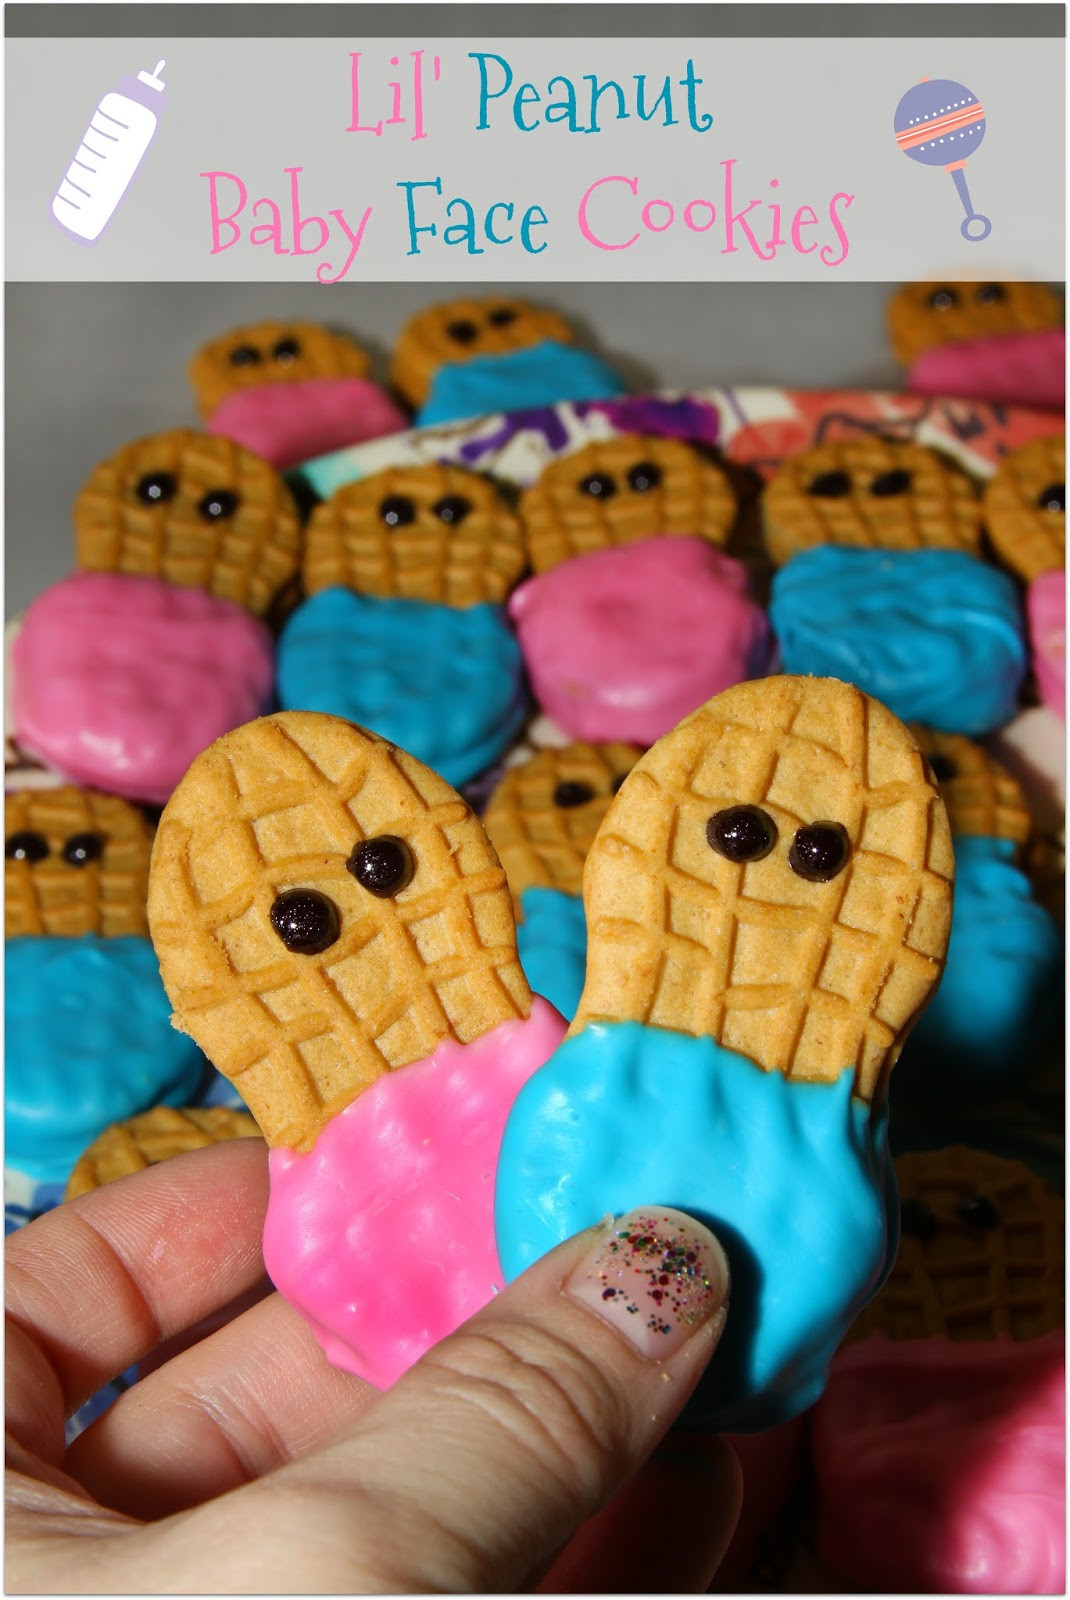 Baby Shower Cookie Recipes
 For the Love of Food Nutter Butter Baby Face Cookies